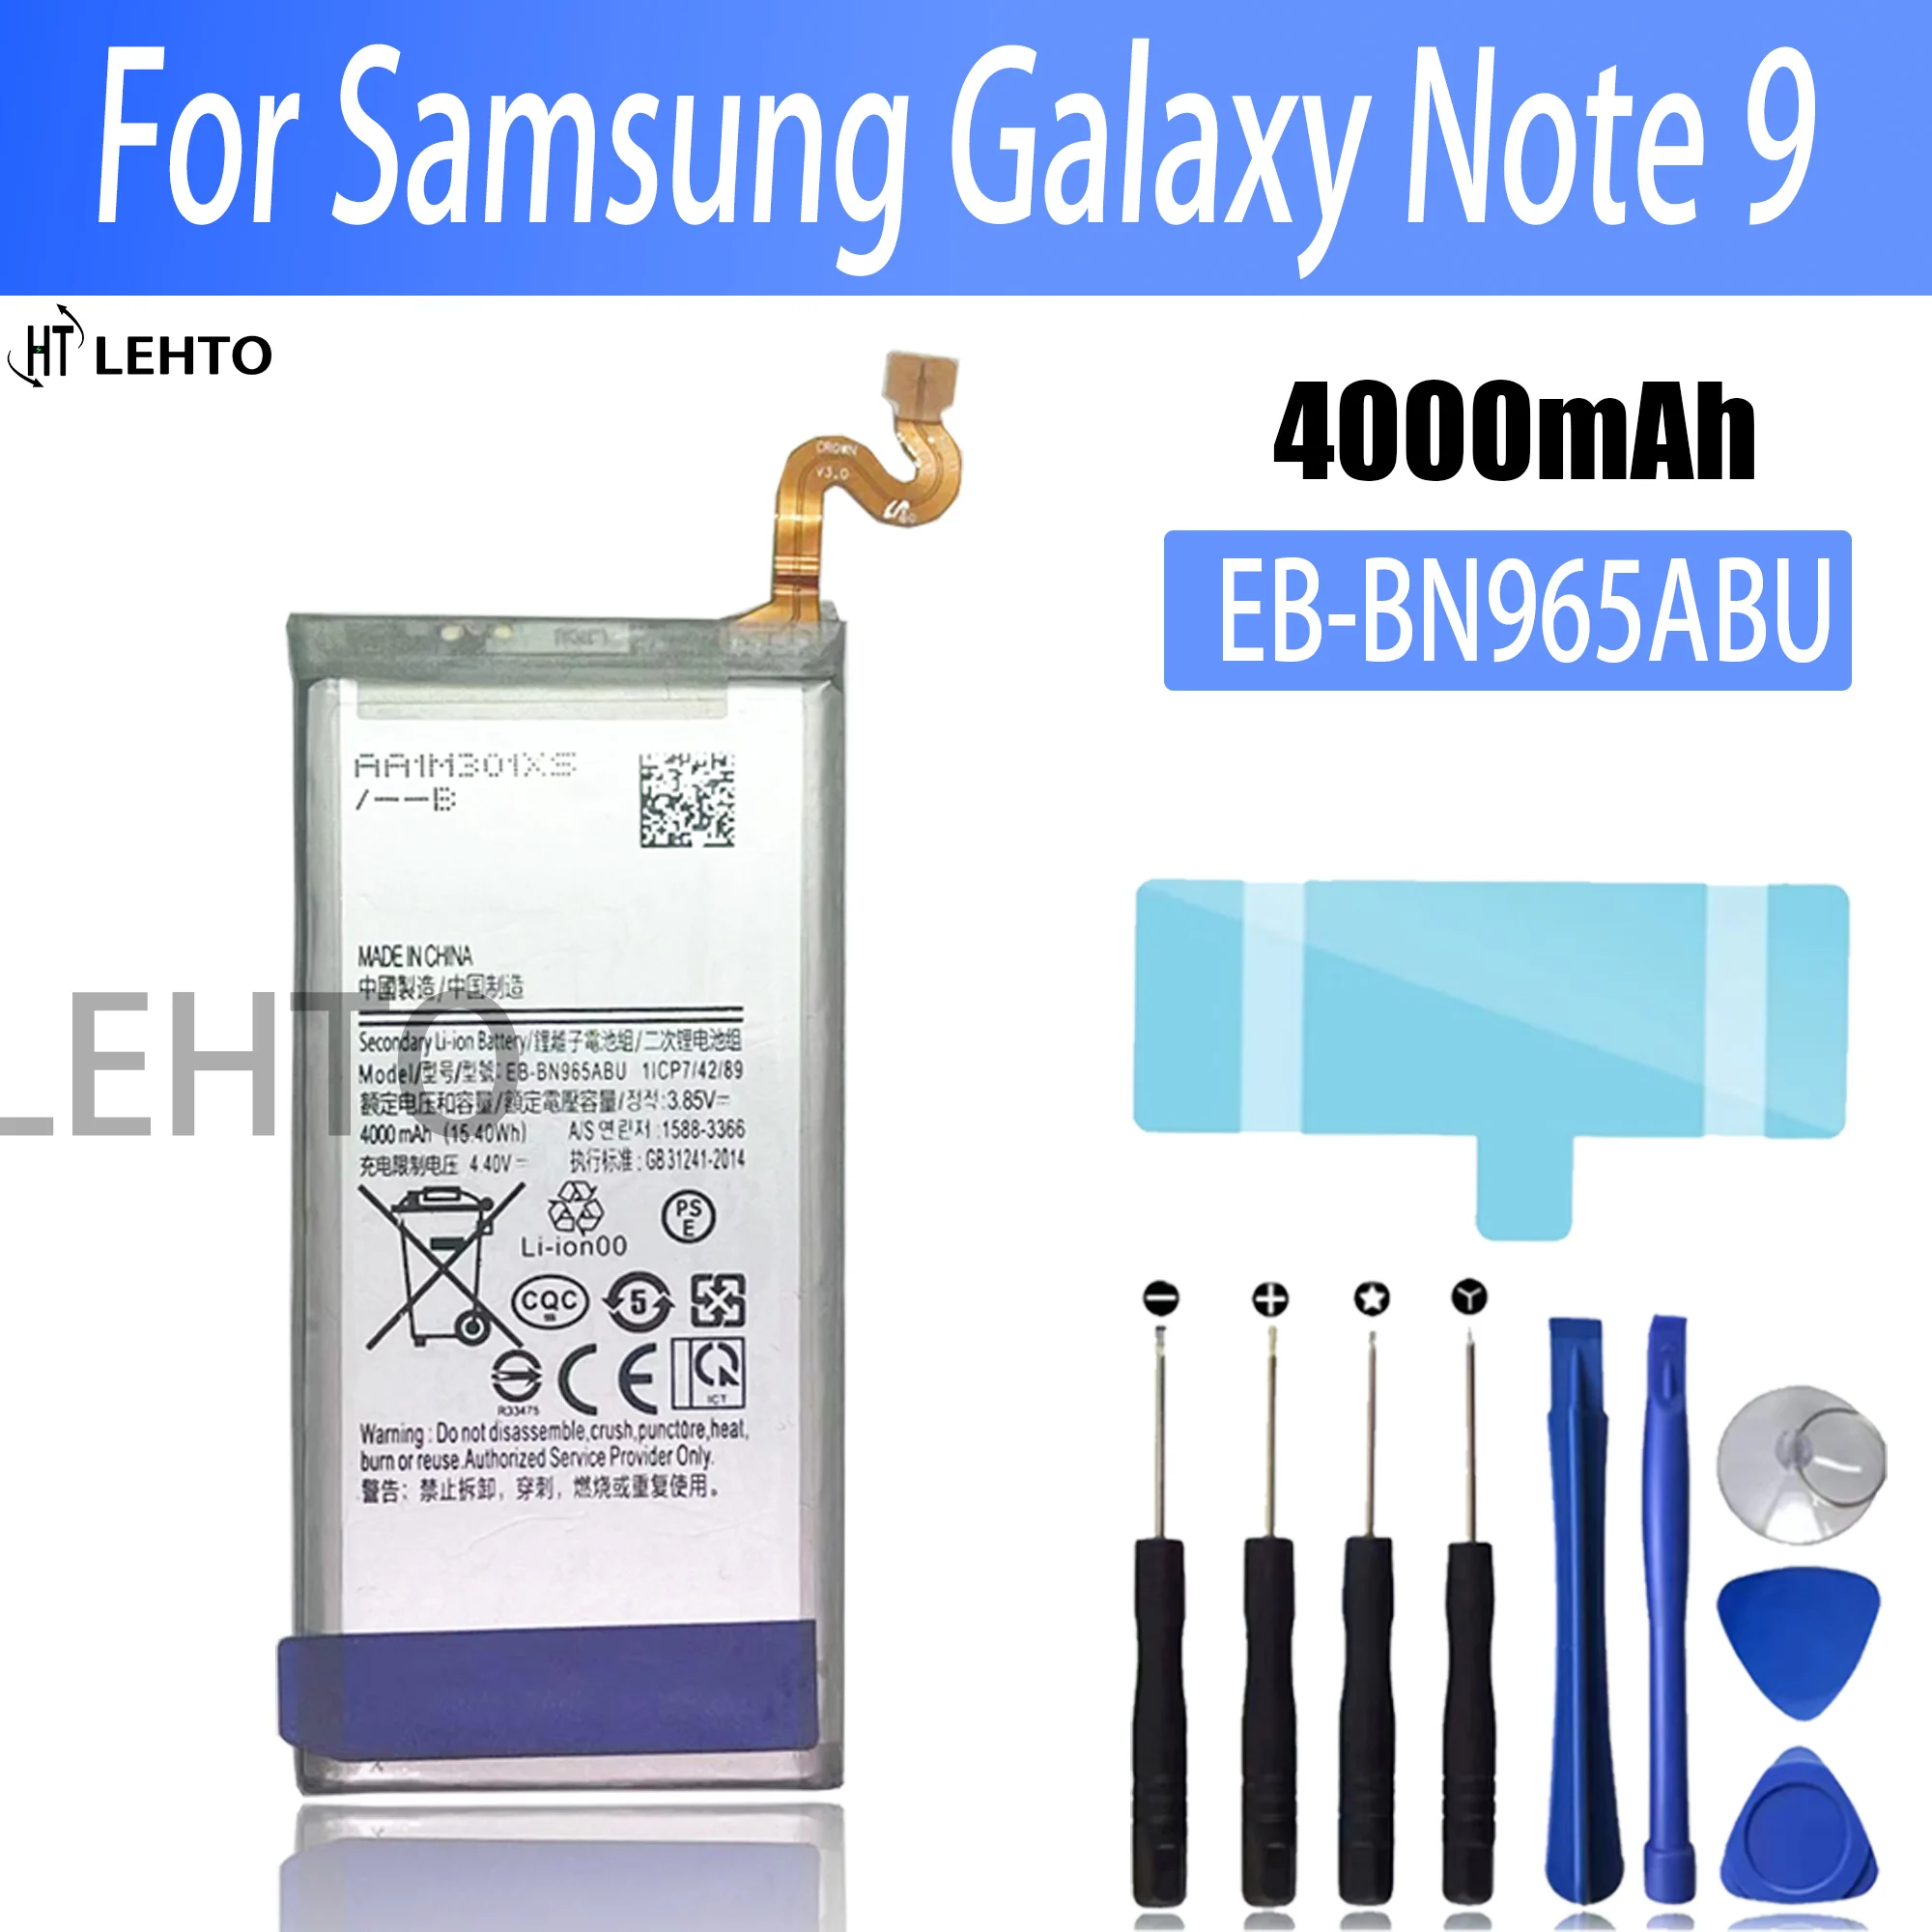 

New Replacement Battery EB-BN965ABU For Samsung Galaxy Note9 Note 9 SM-N9600 N960F N960U N960N N960W SM-N960X 4000mAh